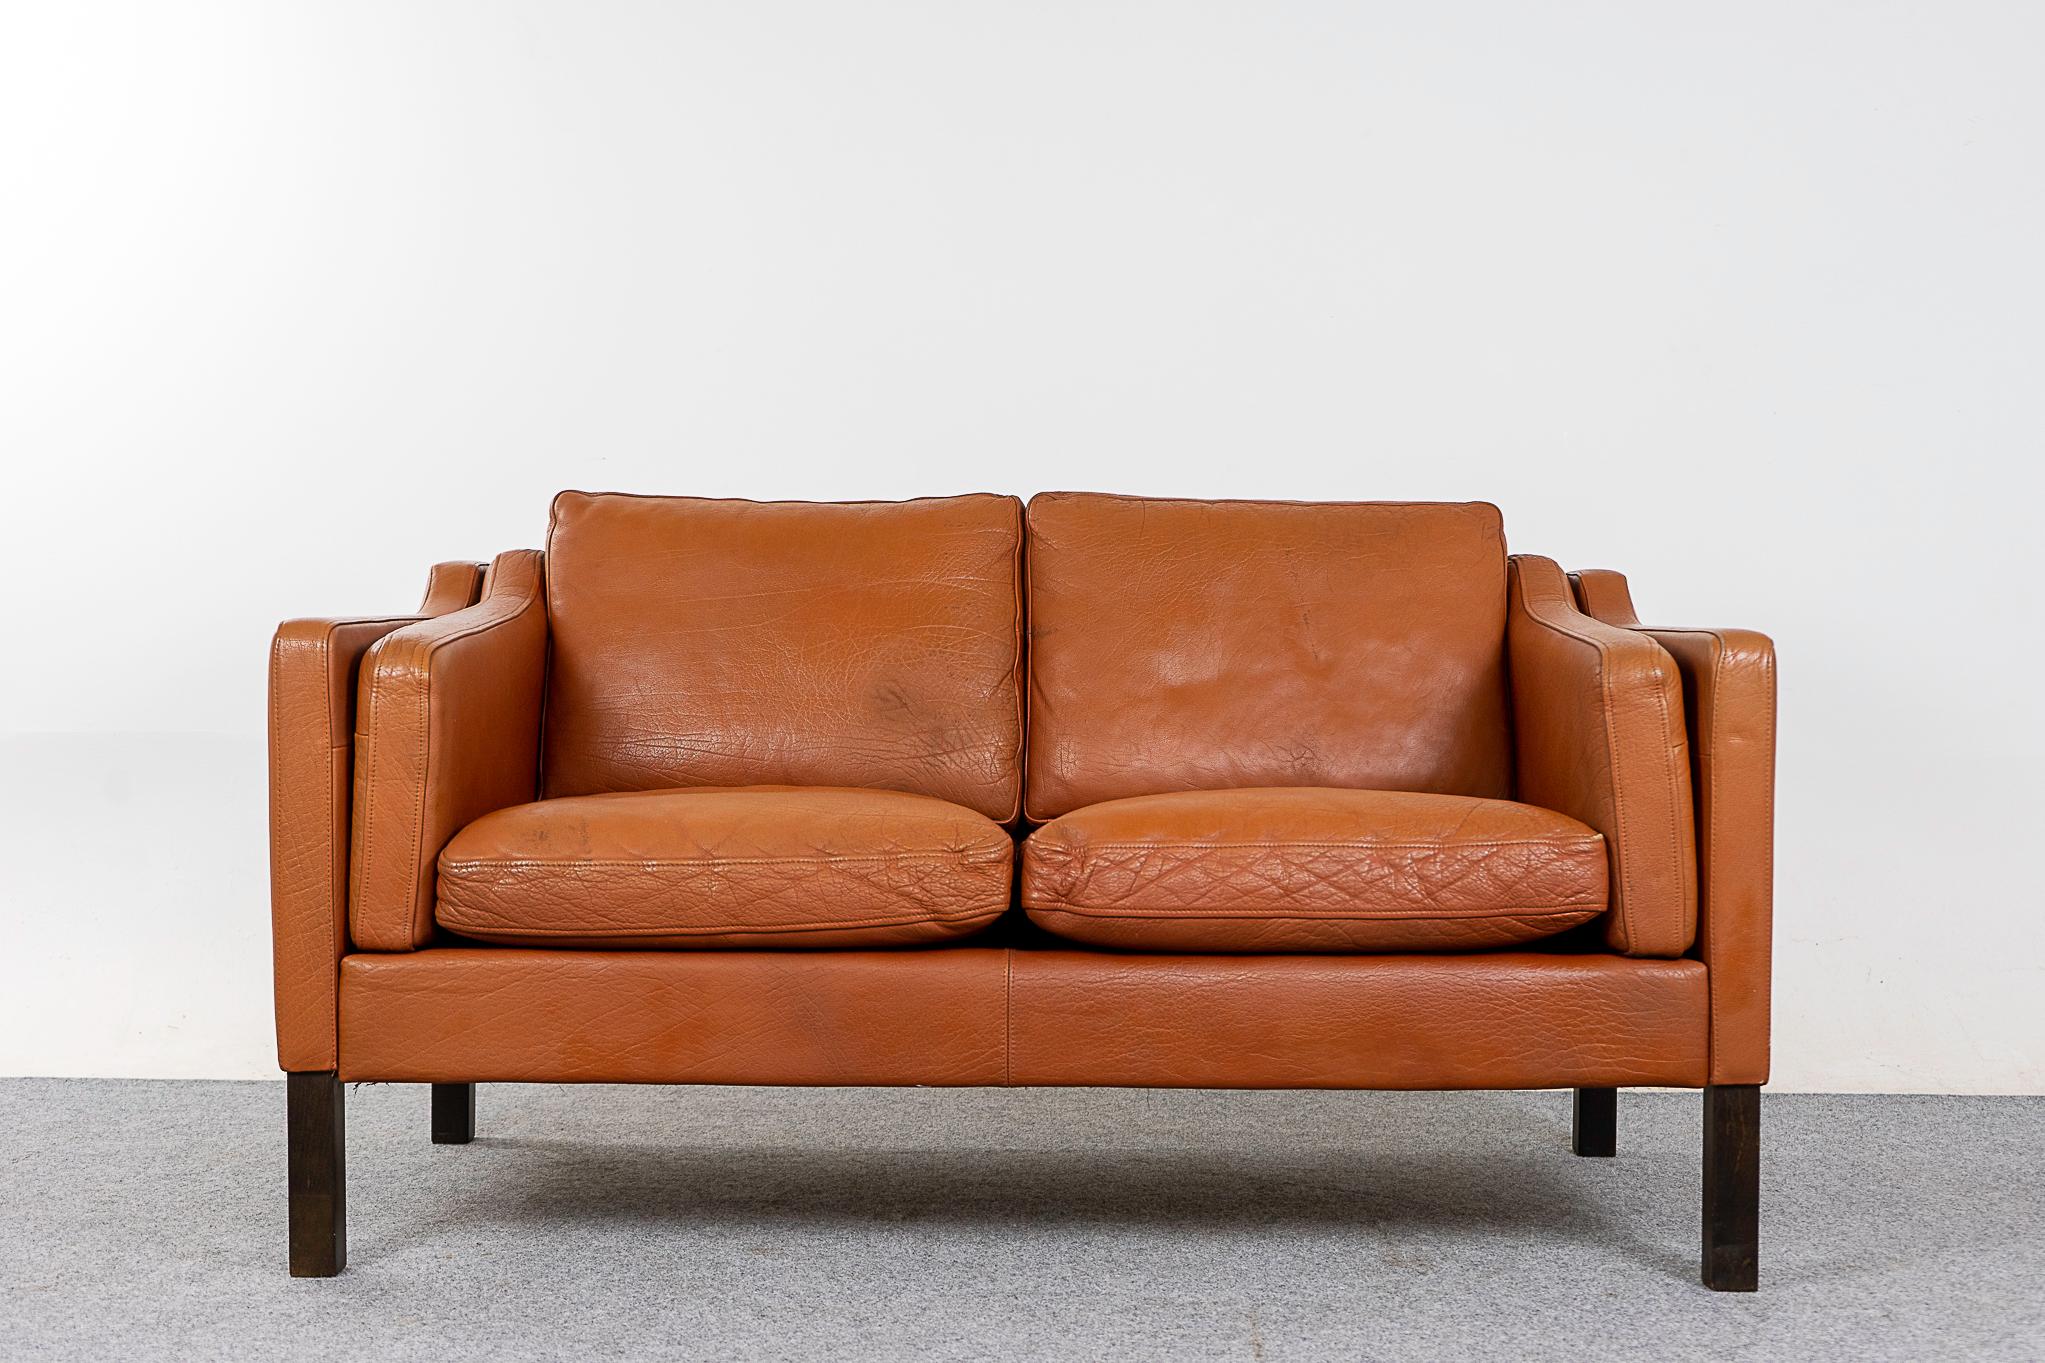 Leather loveseat, circa 1960's. Original tan leather is soft and supple while also being durable to ensure years of use and enjoyment.

Please inquire for remote and international shipping rates.